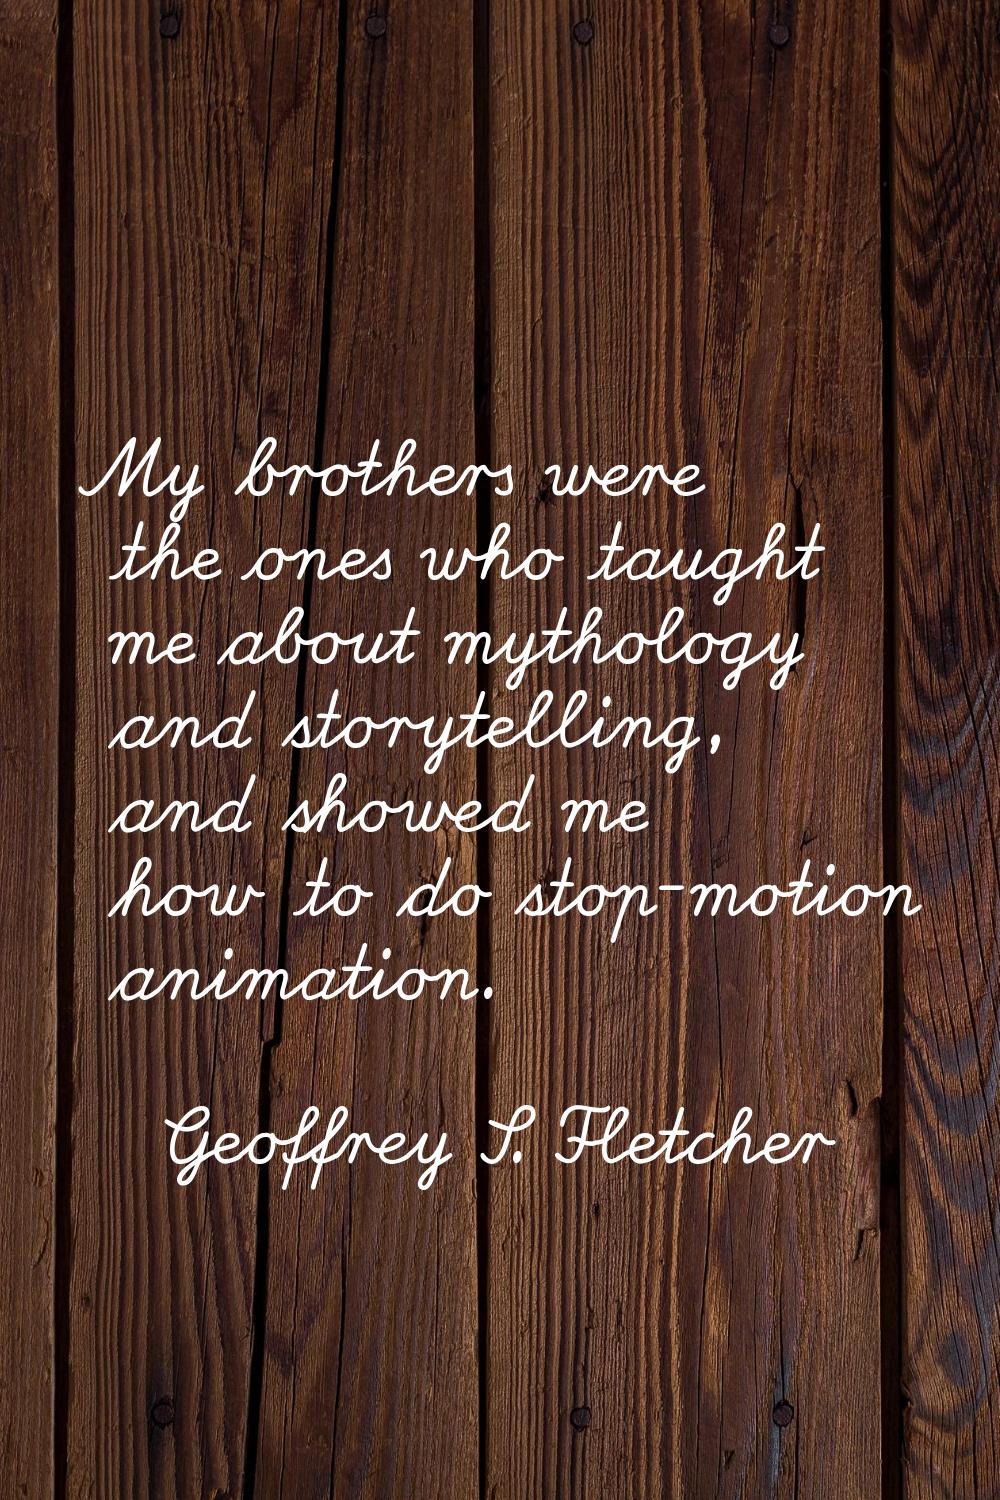 My brothers were the ones who taught me about mythology and storytelling, and showed me how to do s